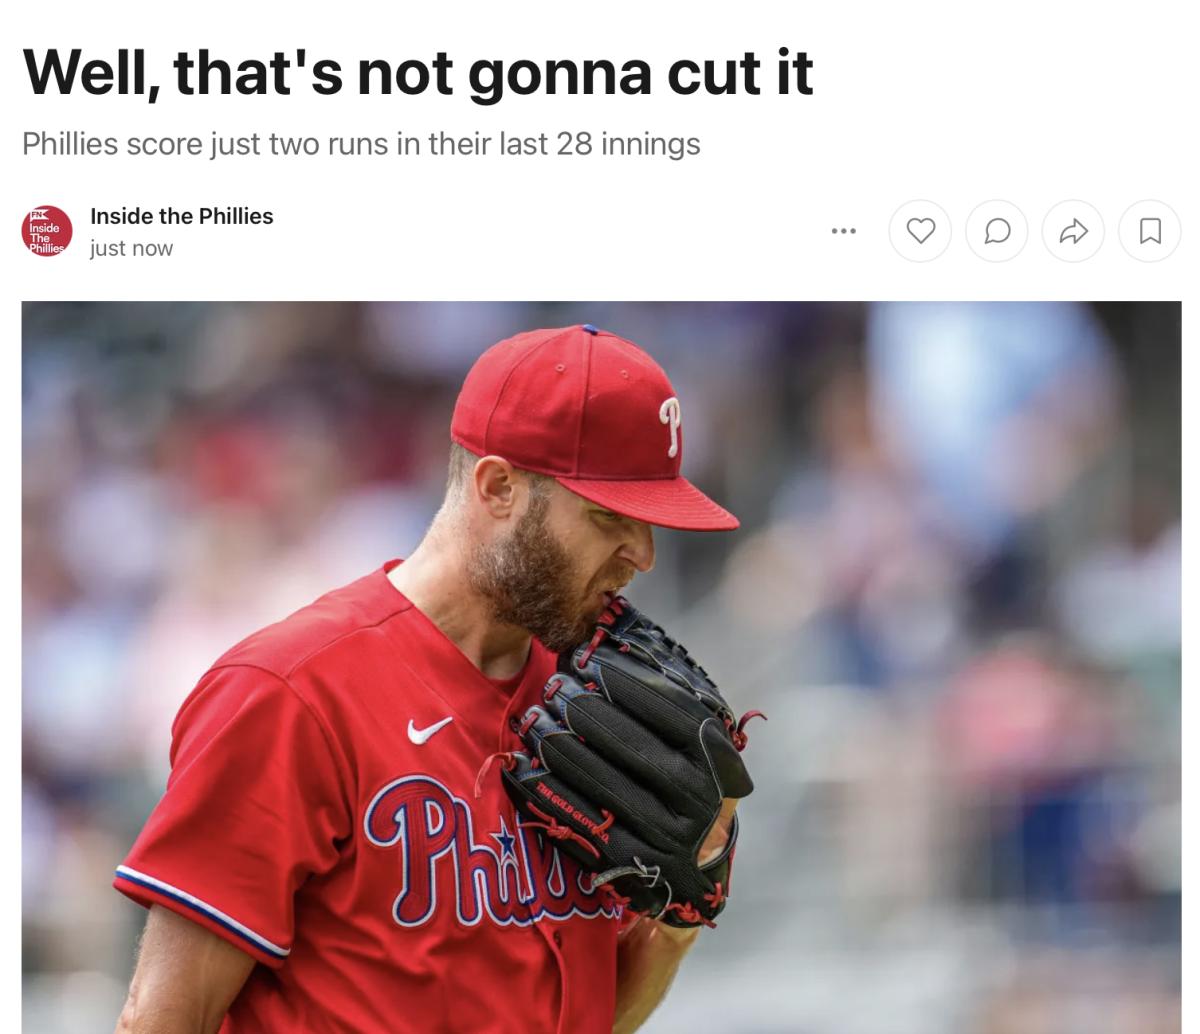 Read and subscribe to Phillies Phocus here.